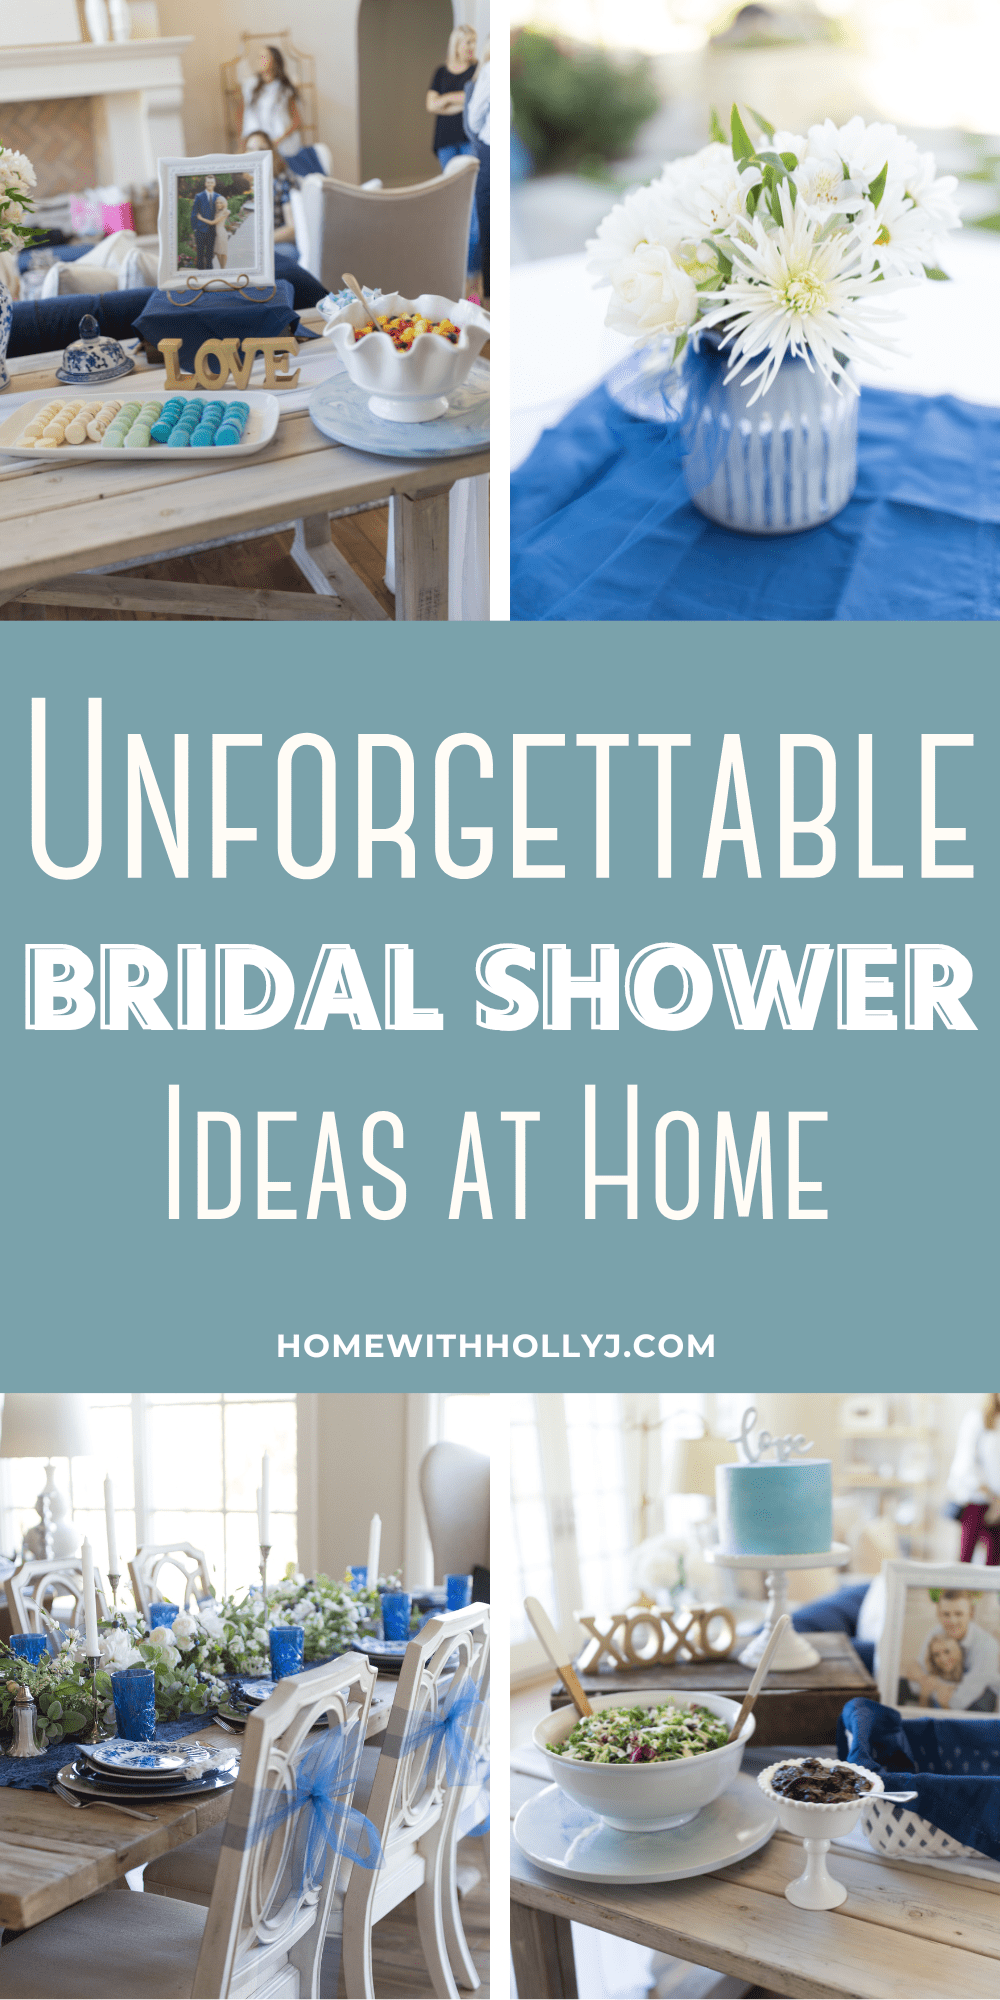 Discover creative and unforgettable bridal shower ideas at home to plan the perfect celebration for the bride-to-be. Read more here.